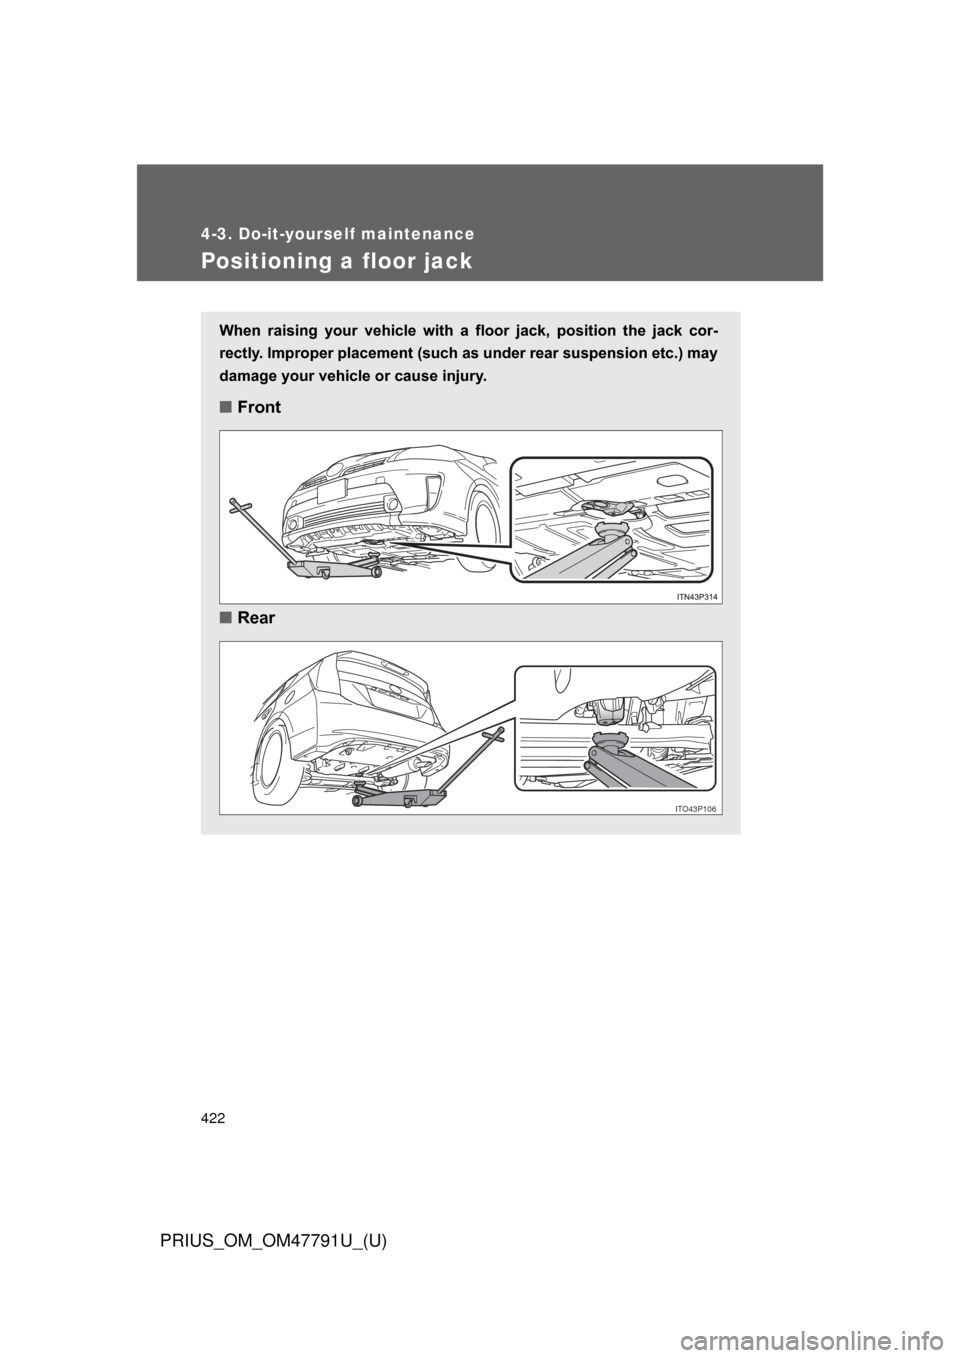 TOYOTA PRIUS 2013 3.G Owners Manual 422
4-3. Do-it-yourself maintenance
PRIUS_OM_OM47791U_(U)
Positioning a floor jack
When  raising  your  vehicle  with  a  floor  jack,  position  the  jack  cor-
rectly. Improper placement (such as un